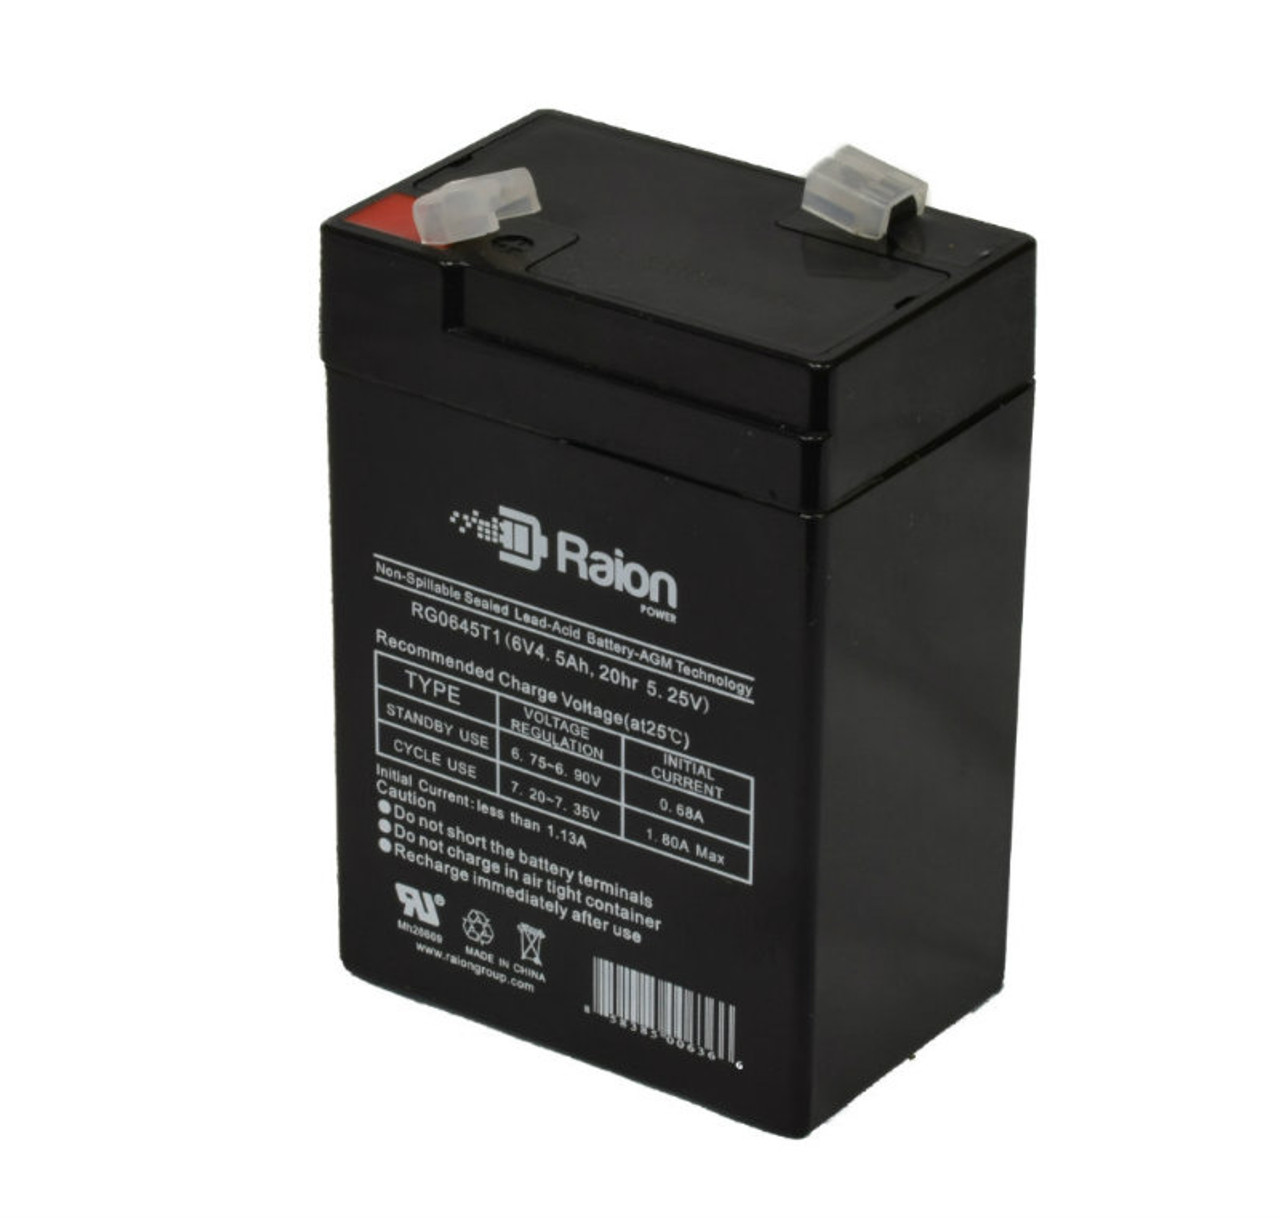 Raion Power RG0645T1 6V 4.5Ah Replacement Battery Cartridge for American Hospital Supply 9009183